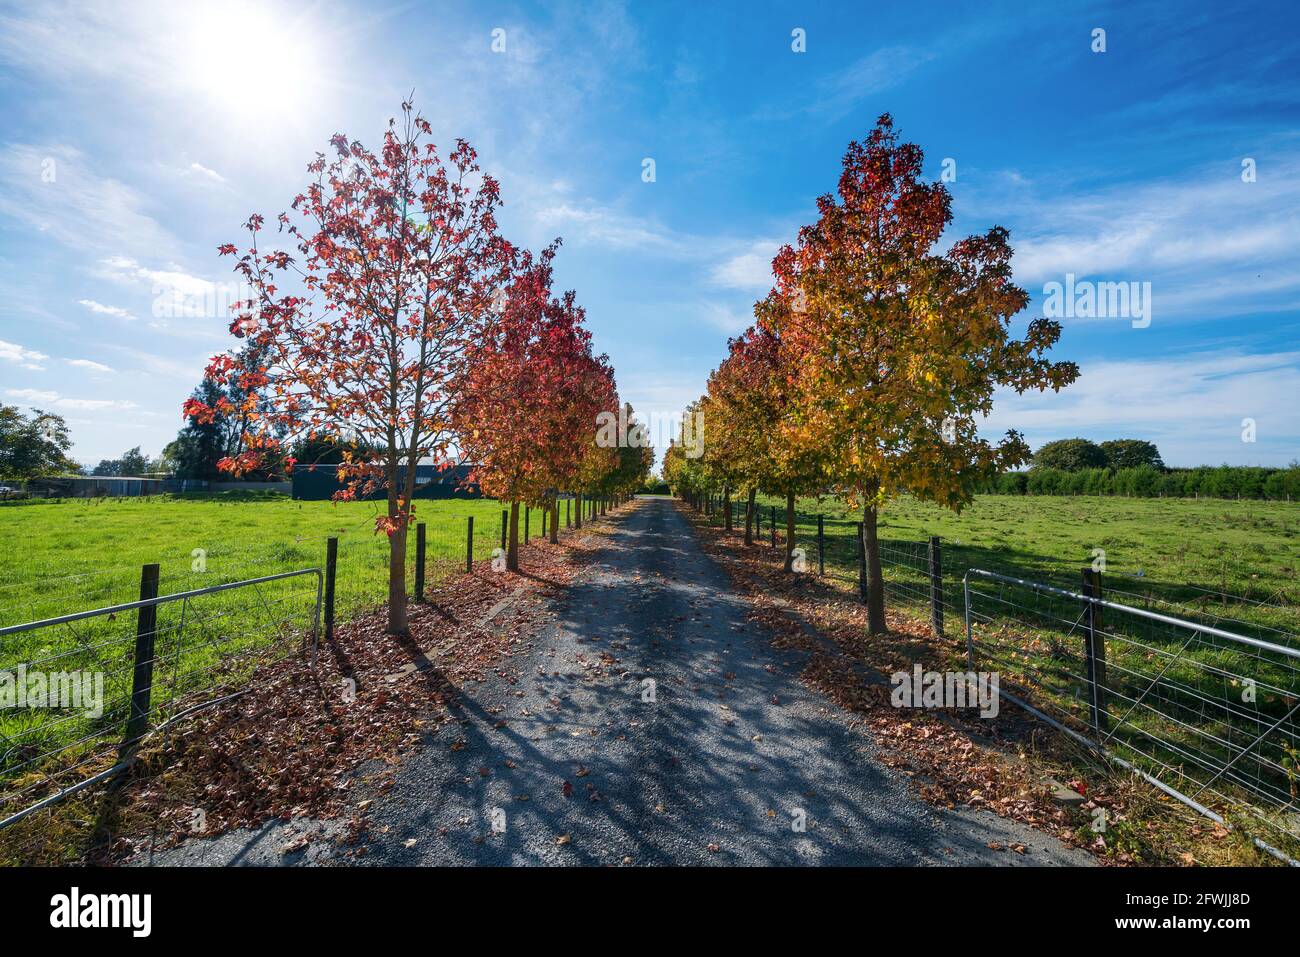 Autumn Colorful Rural Trees Alley Stock Photo